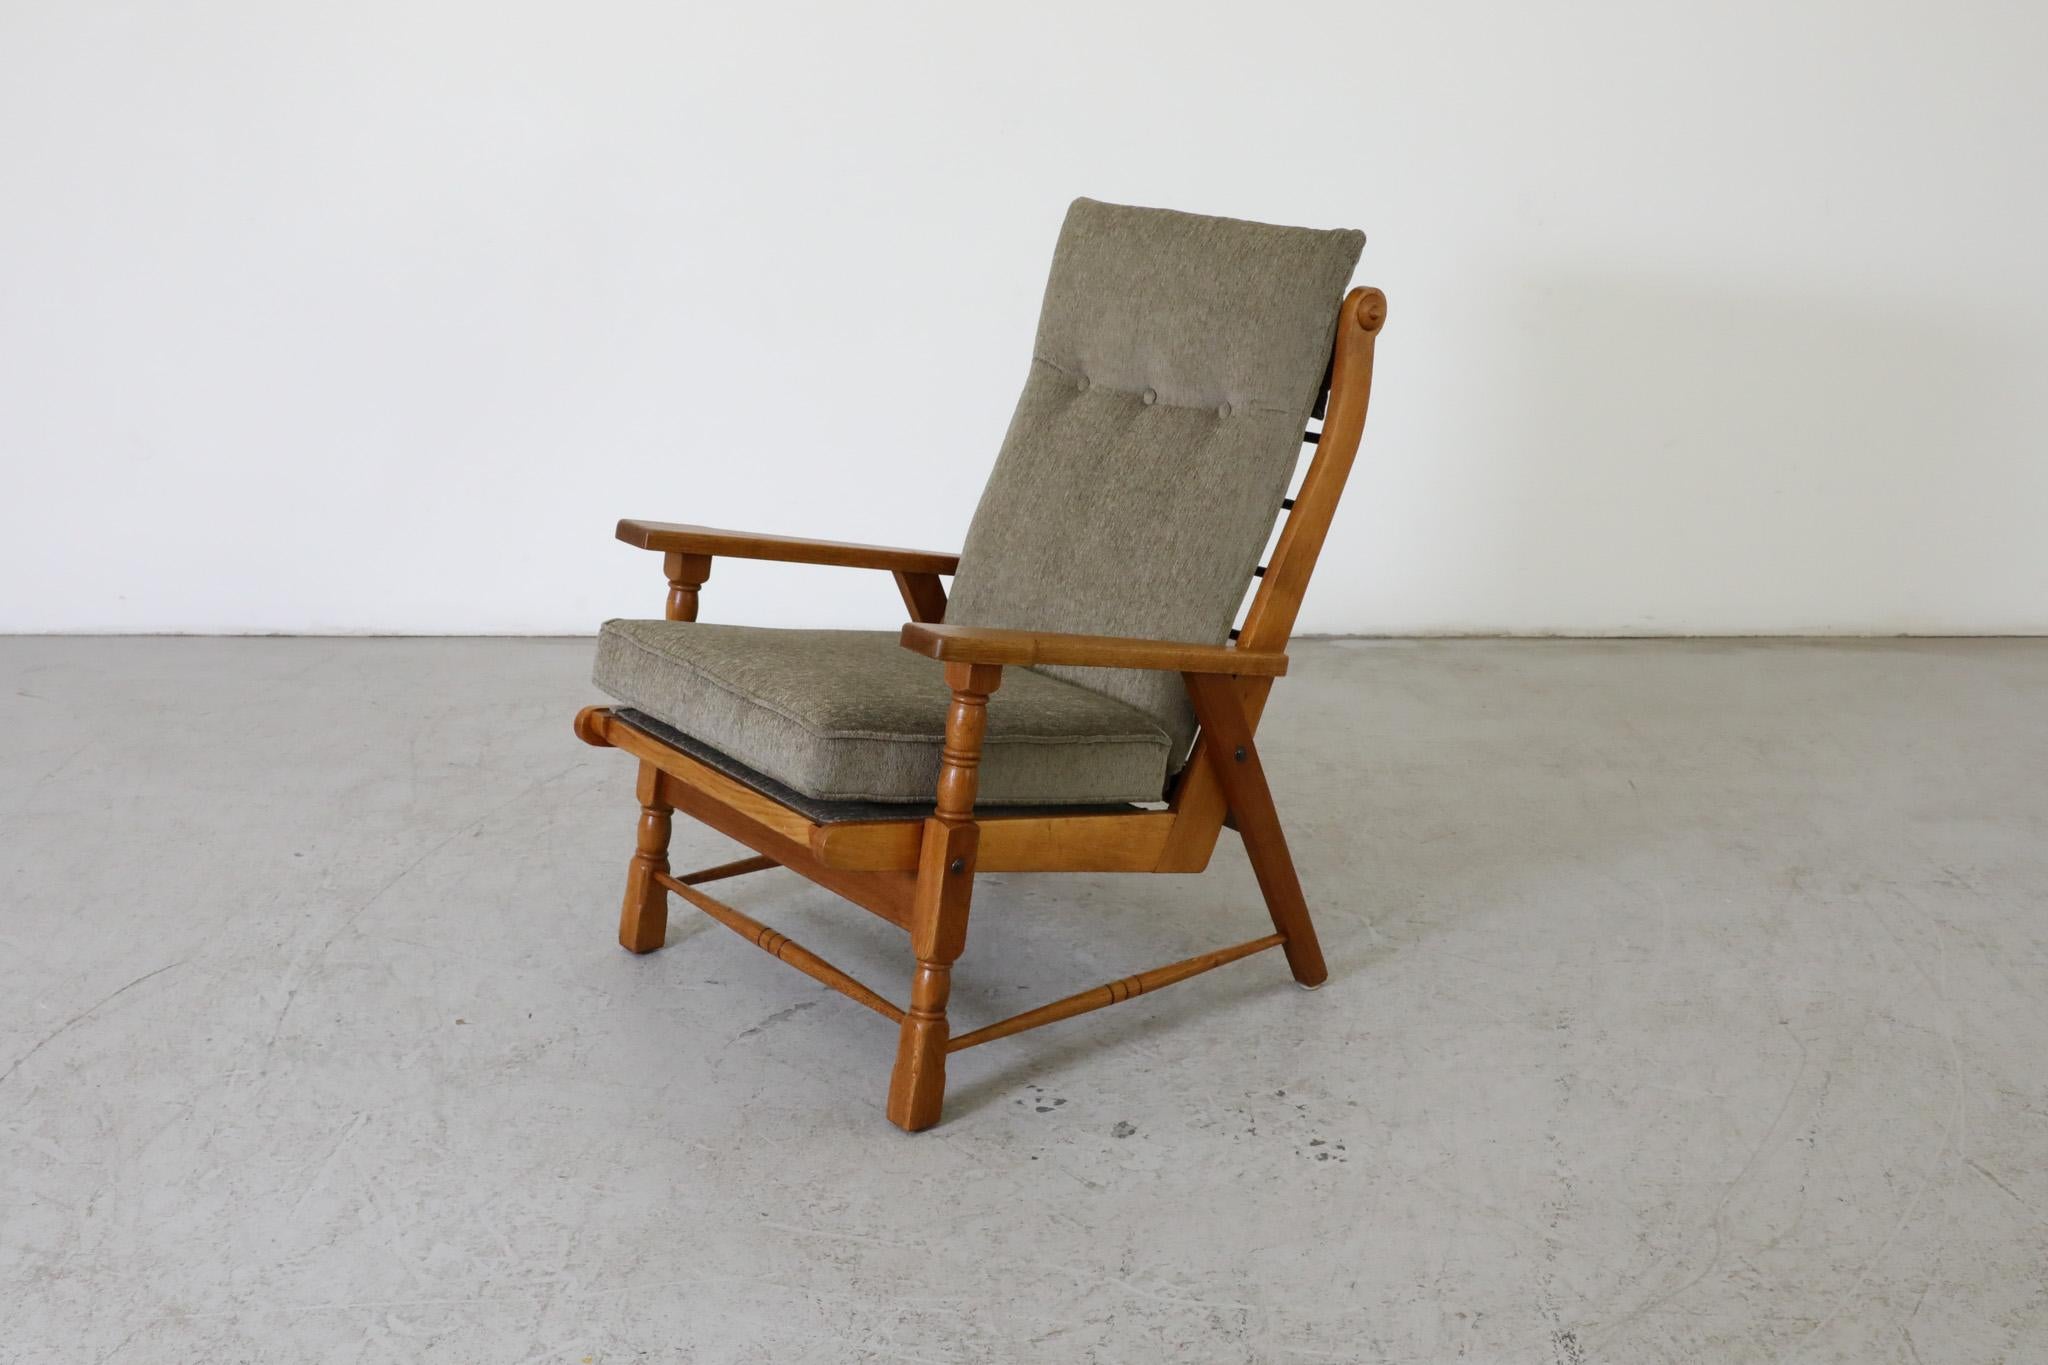 Mid-Century Dutch lounge chair in the style of Robert Parry. An attractive decoratively oak frame lounge chair with new sage toned upholstered seat and back cushions. Well-built and in overall original condition with wear consistent with its age and